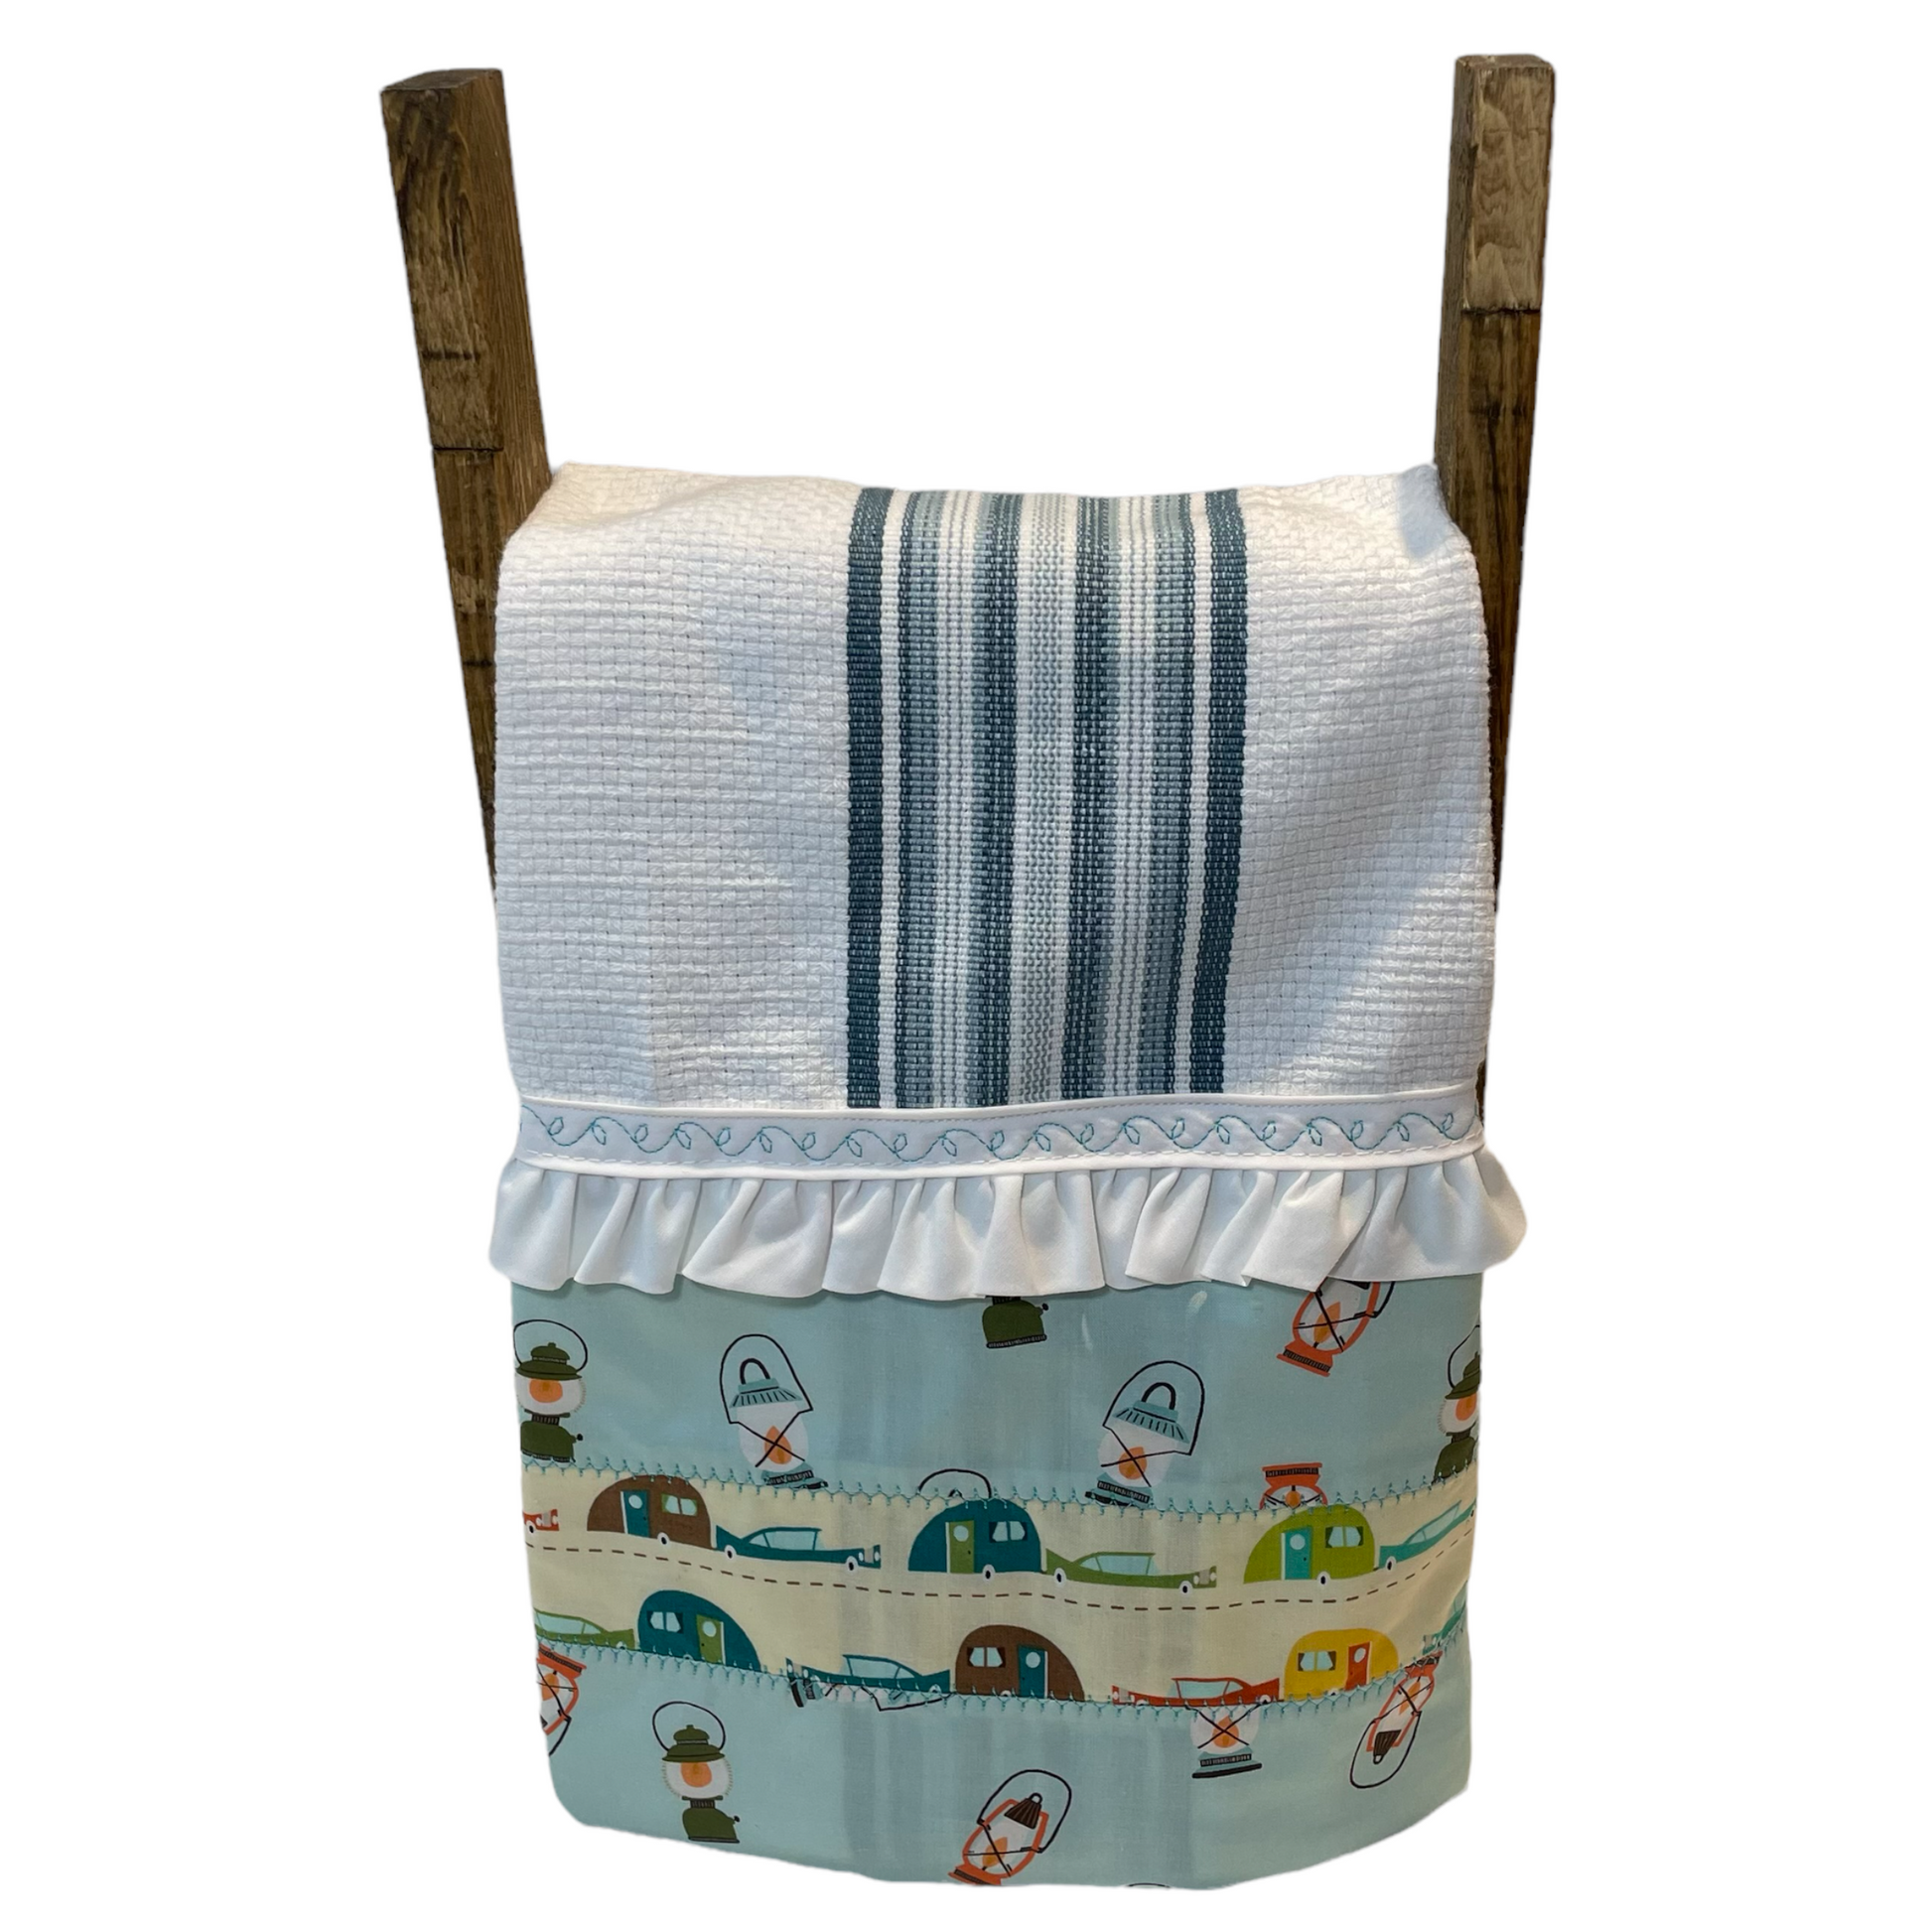 Decorative Kitchen Tea Towel on a Kitchen Counter Dish Towel Ladder. White and green striped toweling with cute retro boler trailers and camping lantern accents. Also features ruffled trim and embroidery stitching. This cute camping themed kitchen towel would make a lovely Mother's Day Gift. Part of a collection of coordinated kitchen linens. Shop the entire catalogue, or find out which local Farmers Market I pop up at. 